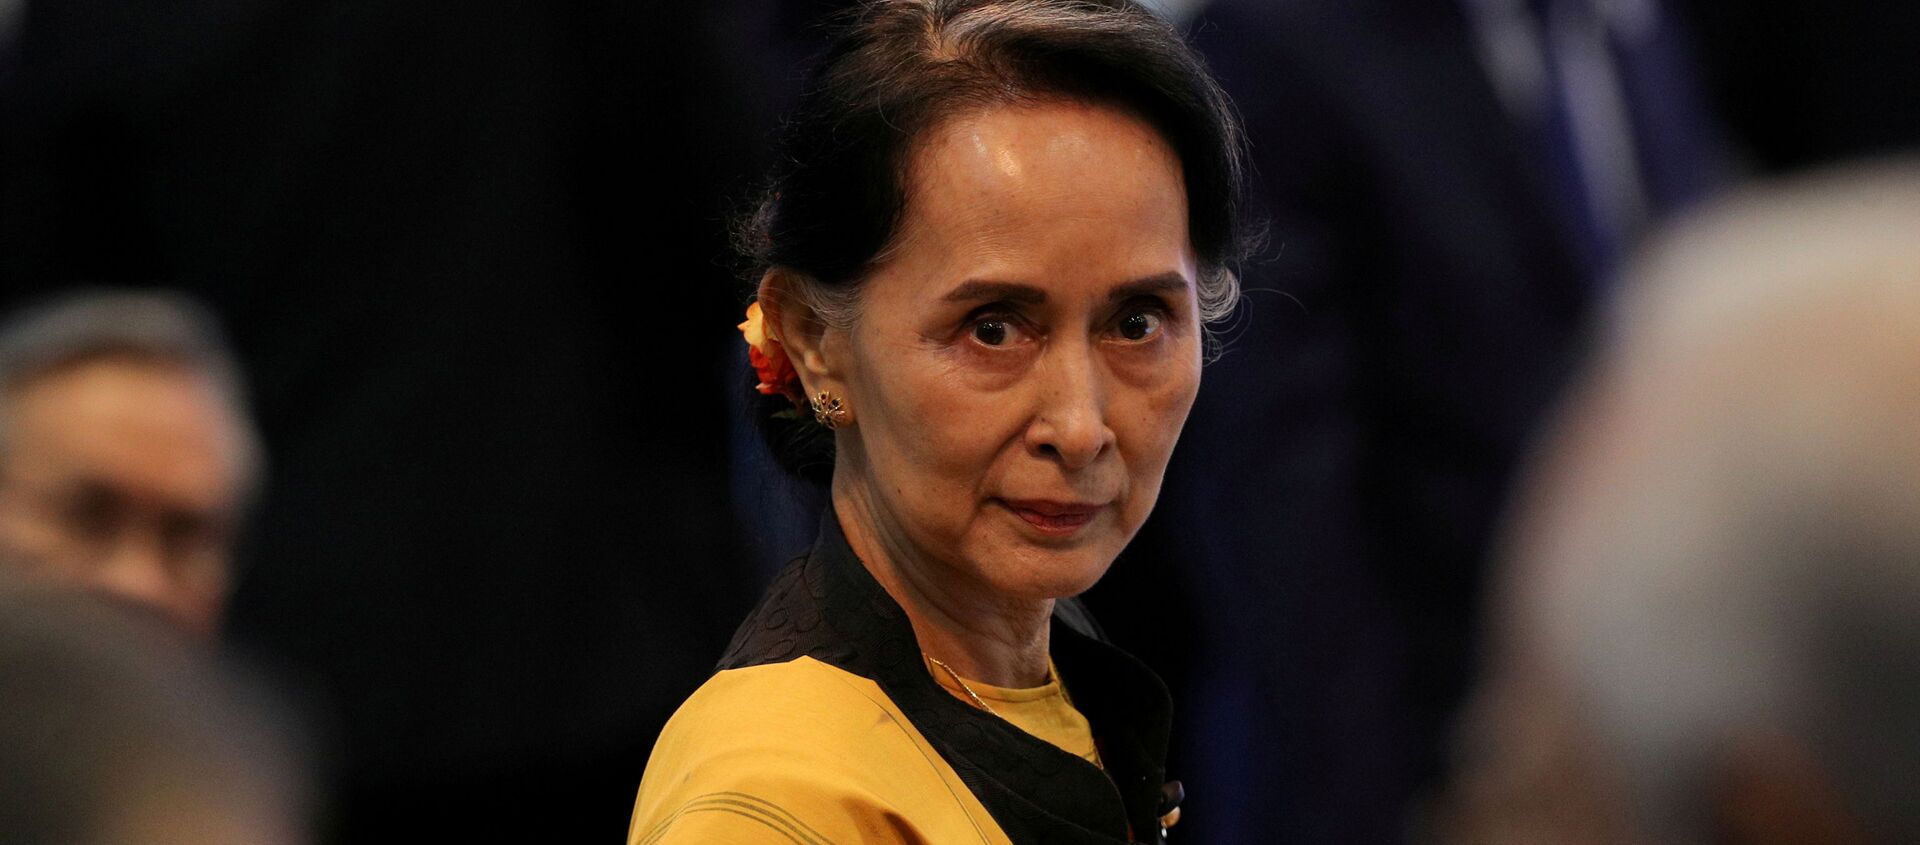 Myanmar State Counselor Aung San Suu Kyi attends the opening session of the 31st ASEAN Summit in Manila - Sputnik International, 1920, 15.02.2021